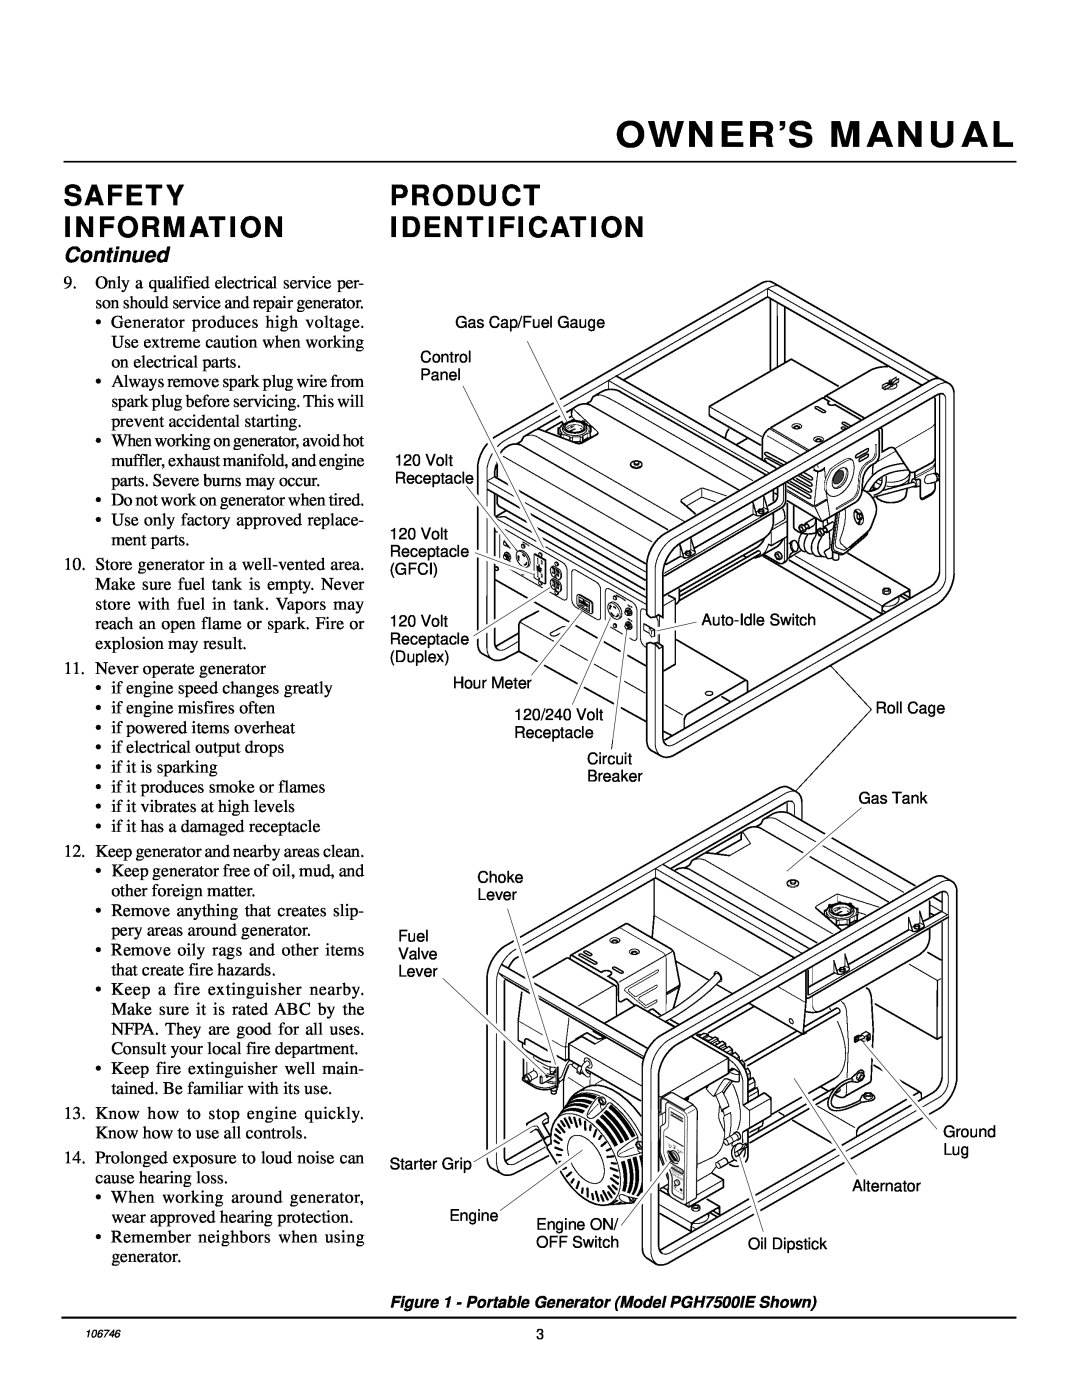 Desa PGH7500IE, PGH1100IE installation manual Product Identification, Continued, Safety Information 